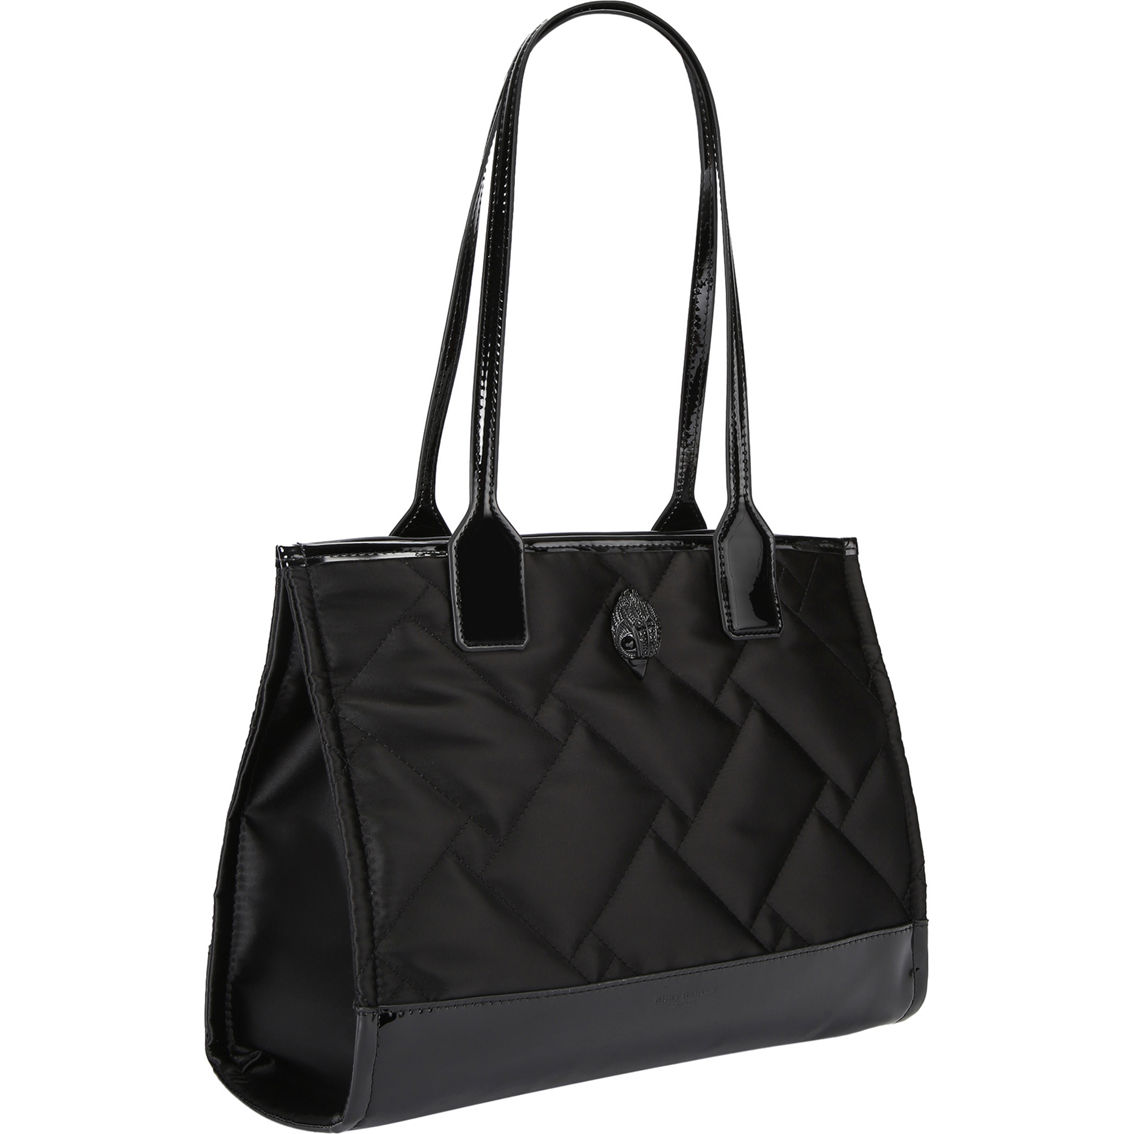 Kurt Geiger Black Recycled Square Small Shopper - Image 2 of 6